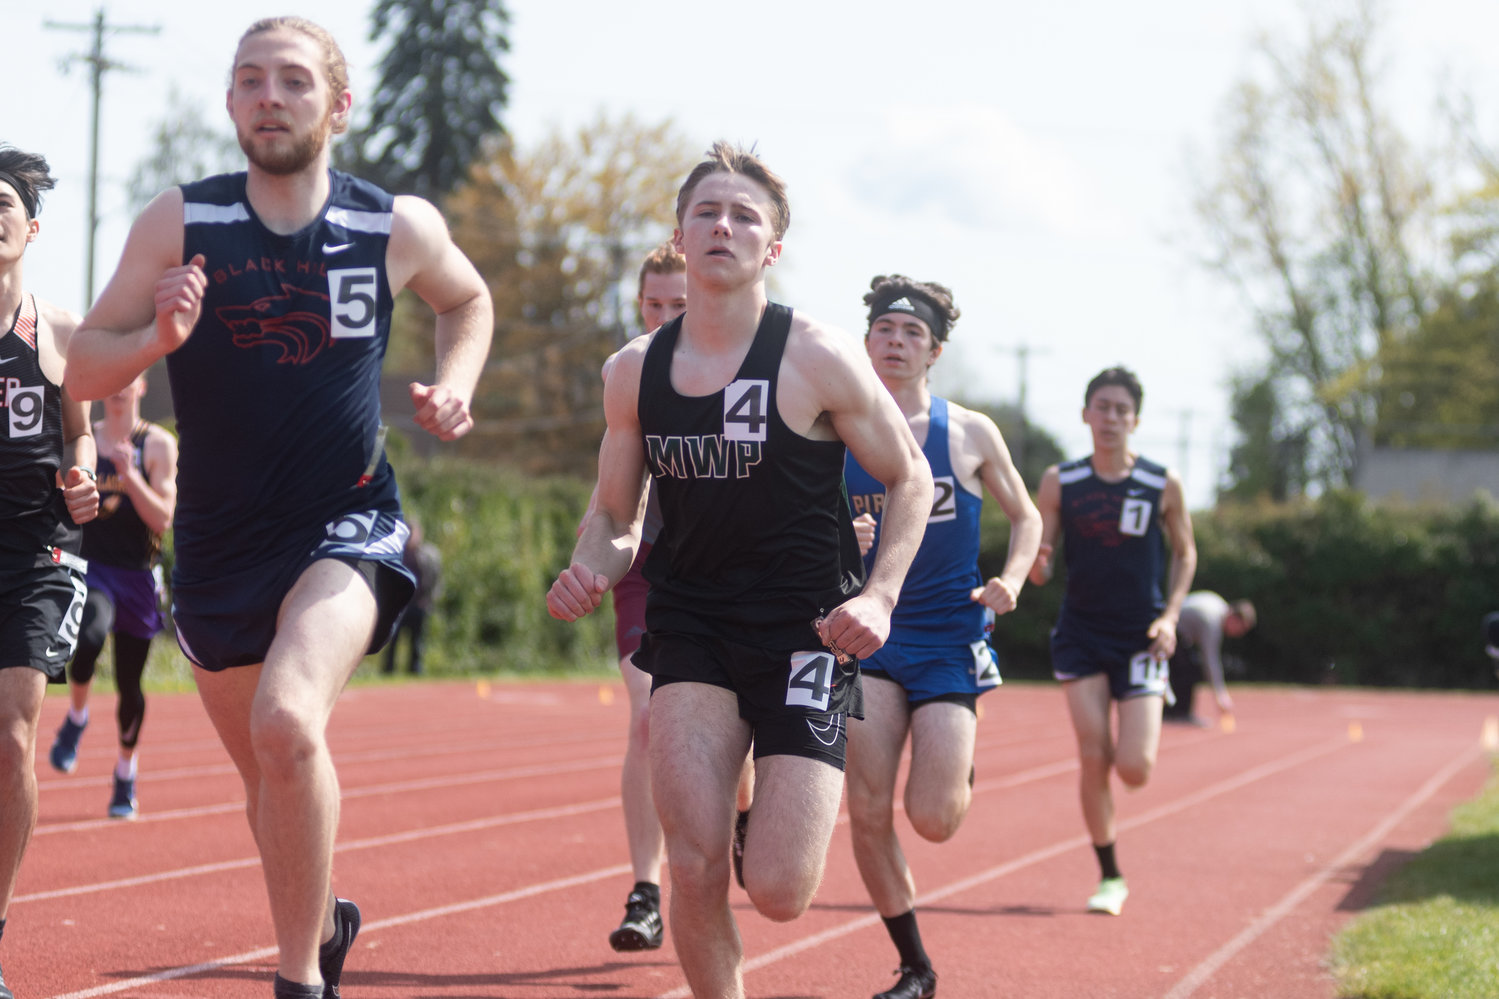 Morton-White Pass runner Matt Cooper tries to stay in good position in the 800-meter run at the Chehalis Activators Classic April 23 at W.F. West.